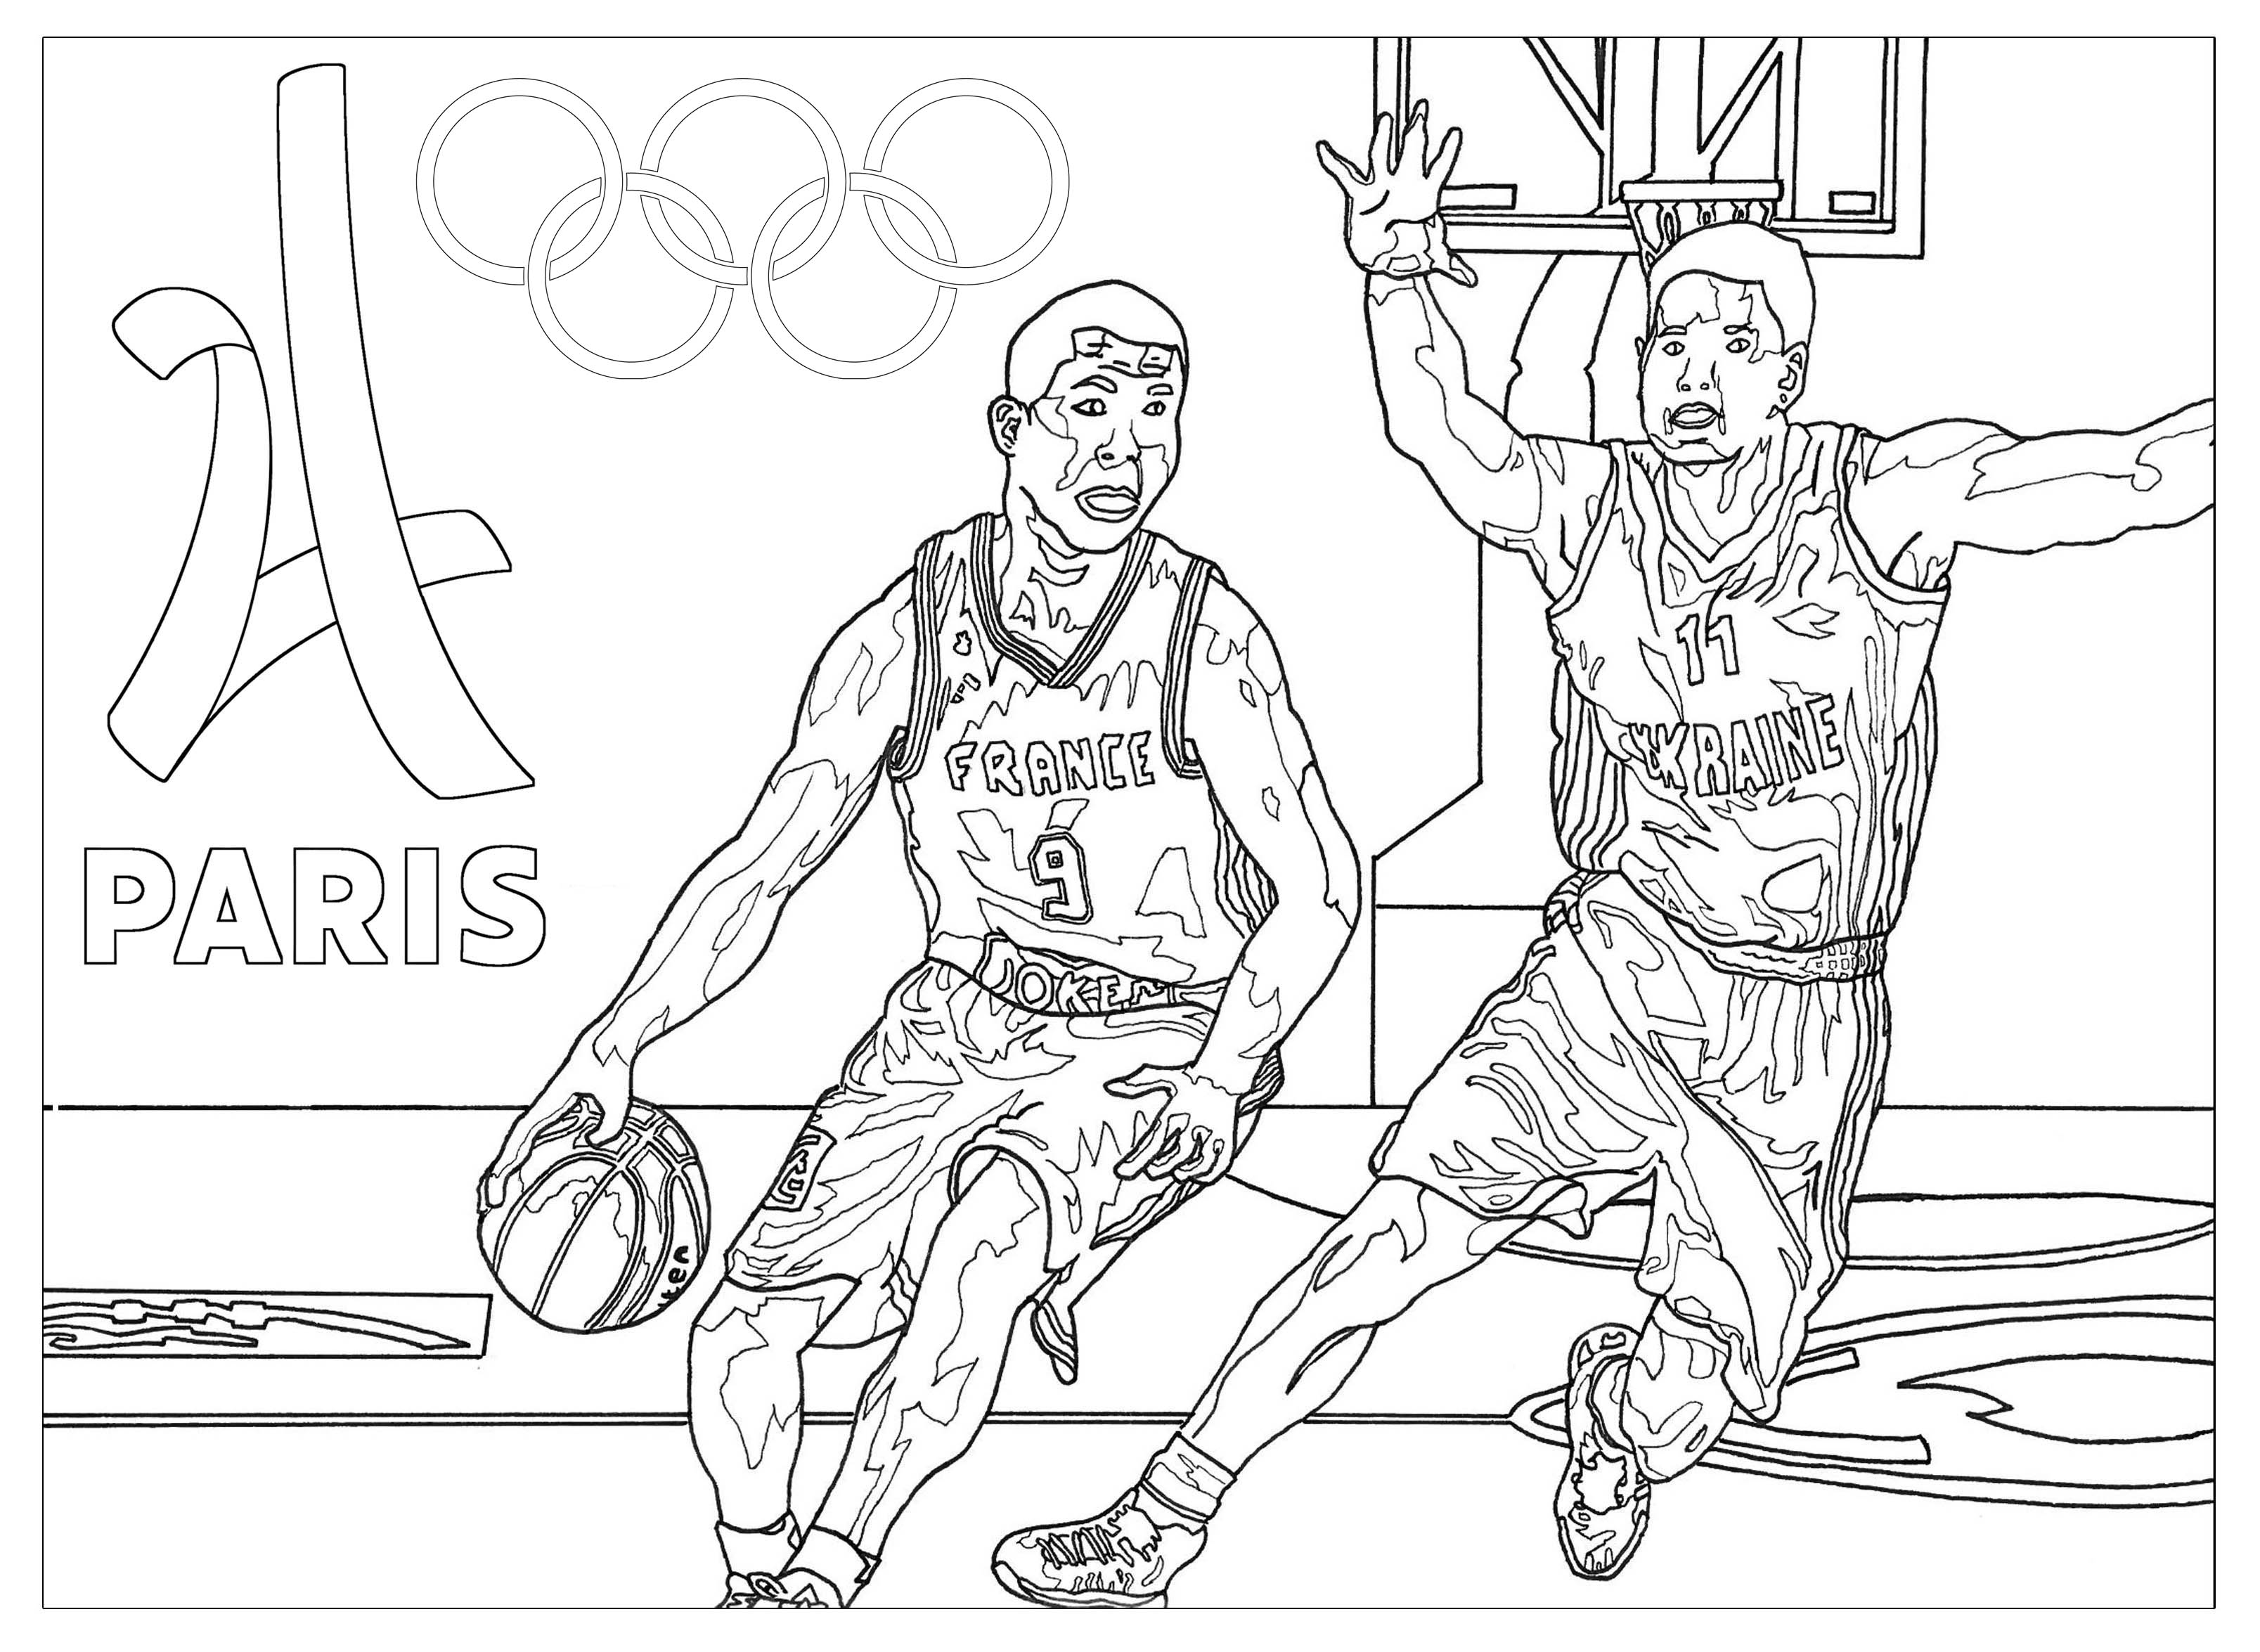 Olympic Games coloring page to print and color for free